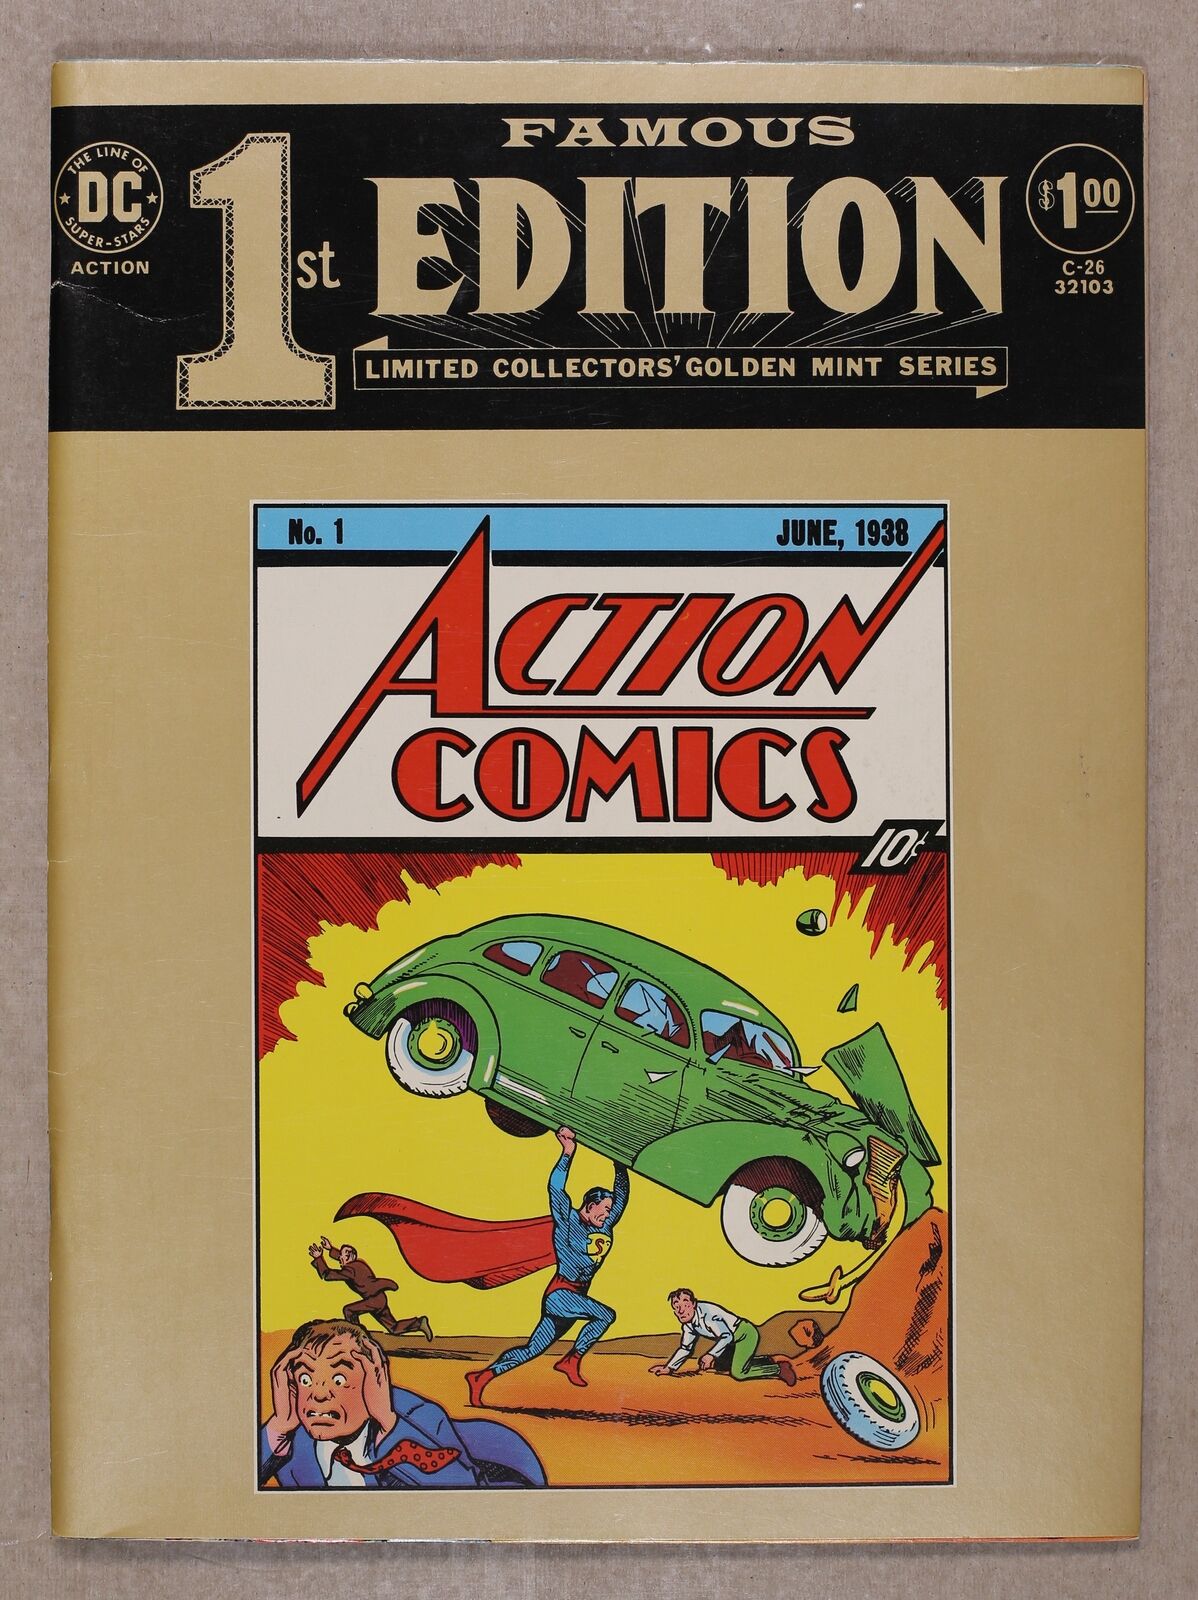 Famous First Edition Action Comics C-26SOFTCOVER FN 6.0 1974